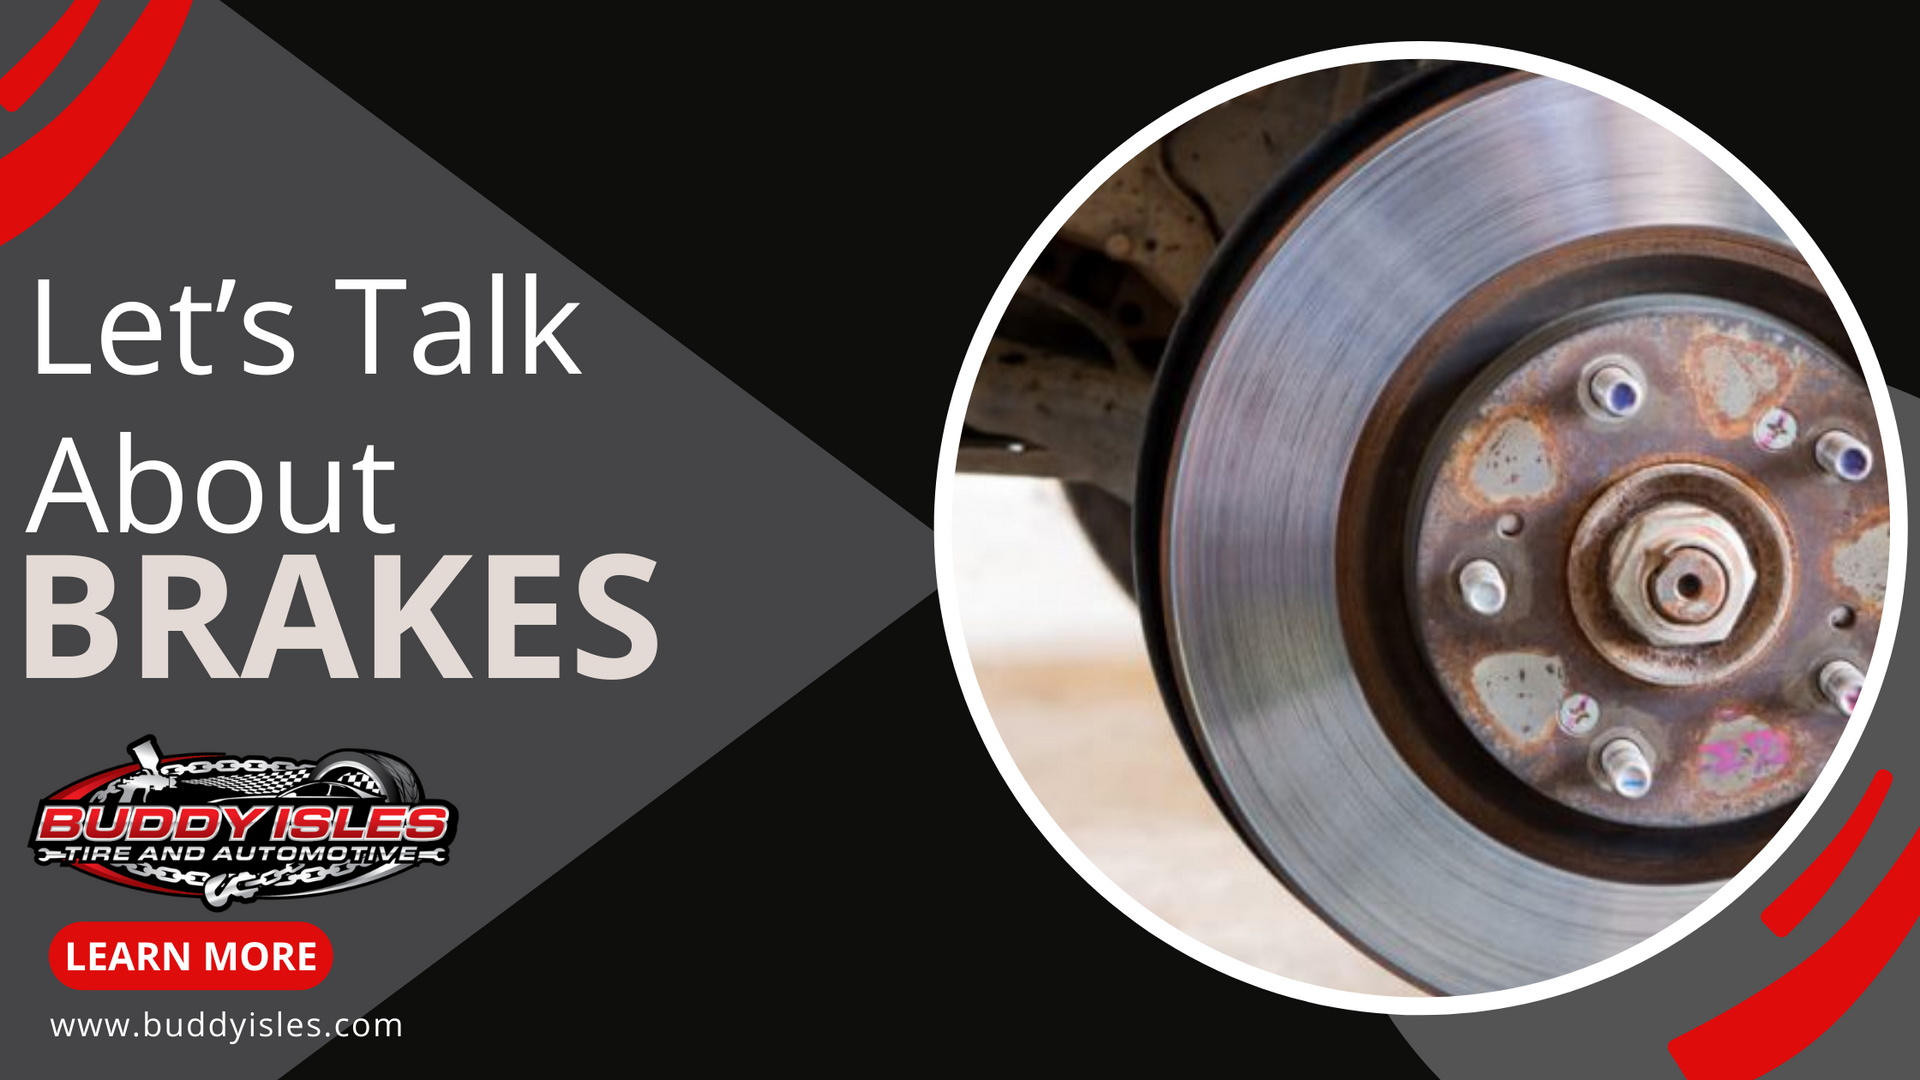 Let's Talk Brakes at Buddy Isles Tire and Automotive in Littleton, NC